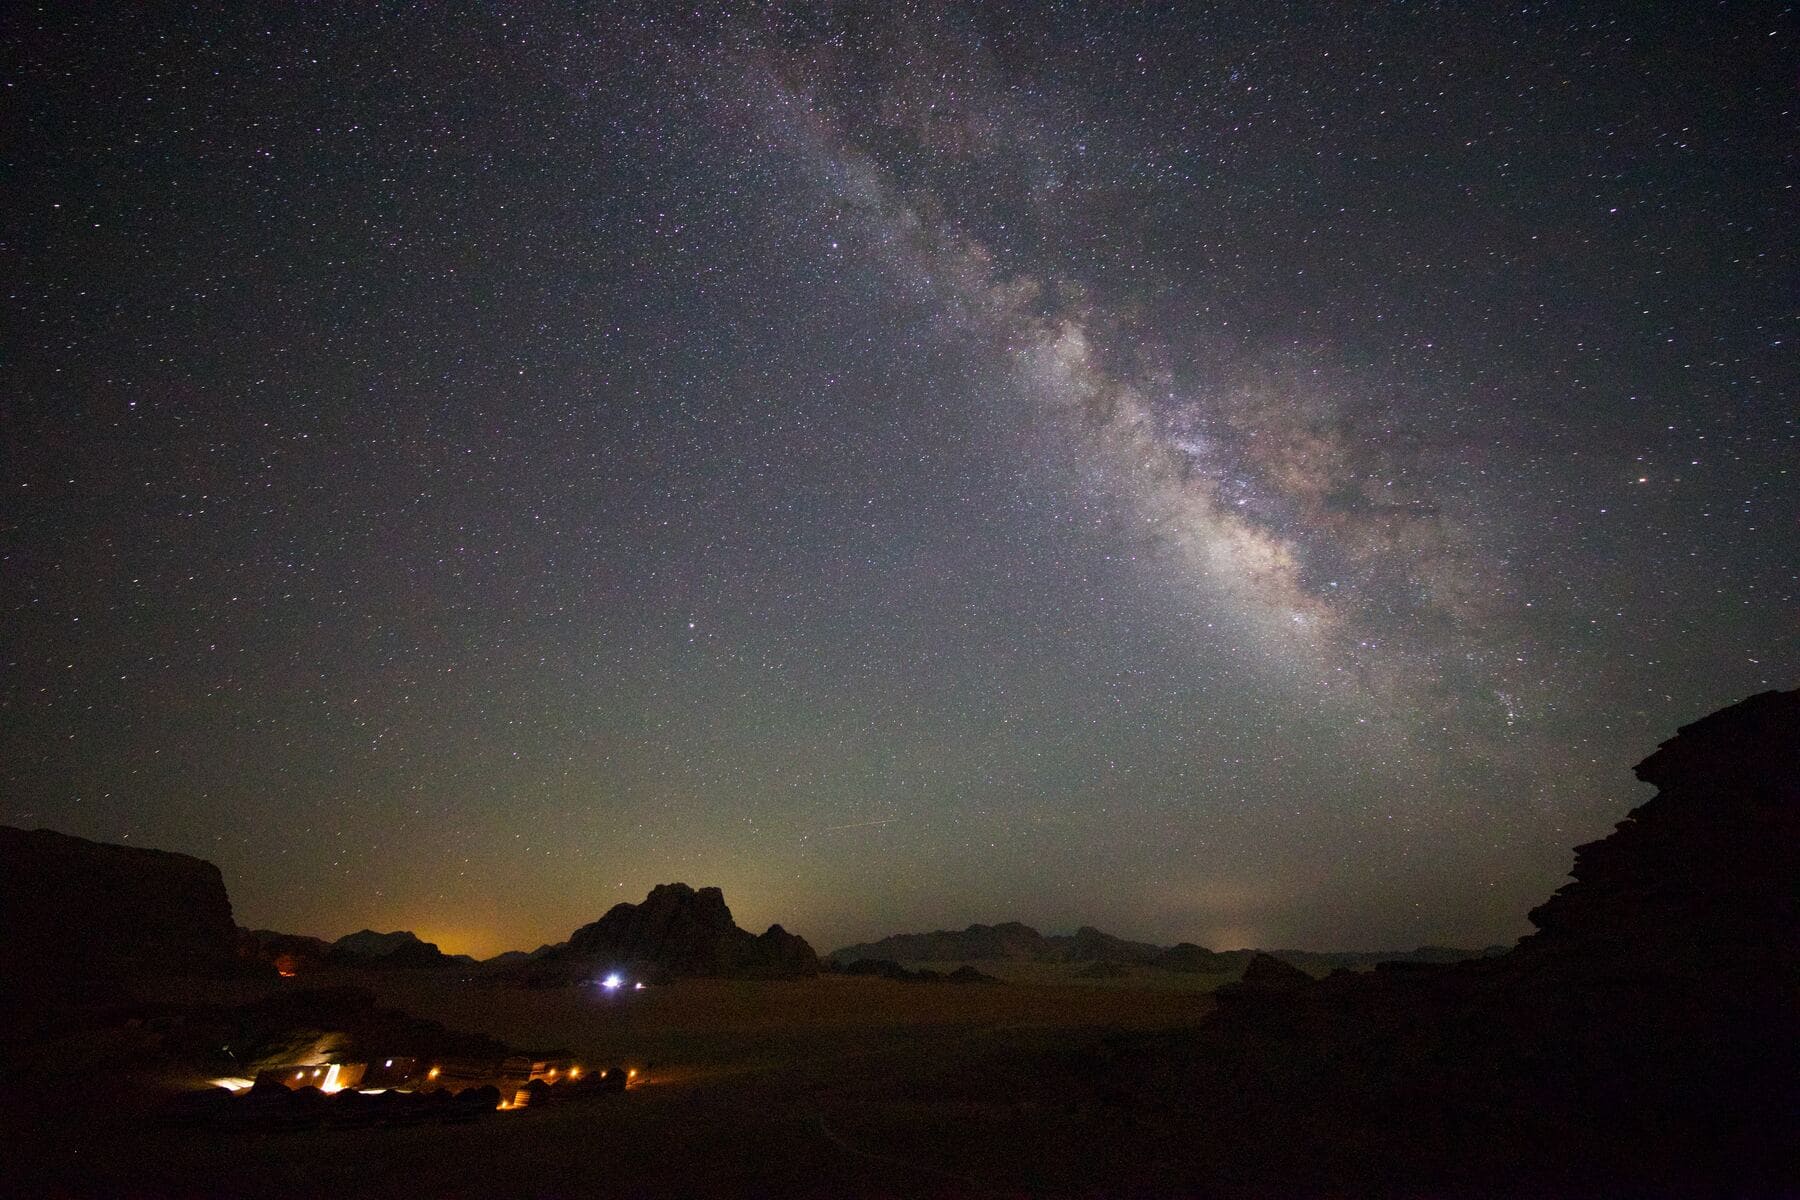 Camping in the Wadi Rum desert with the Milky Way